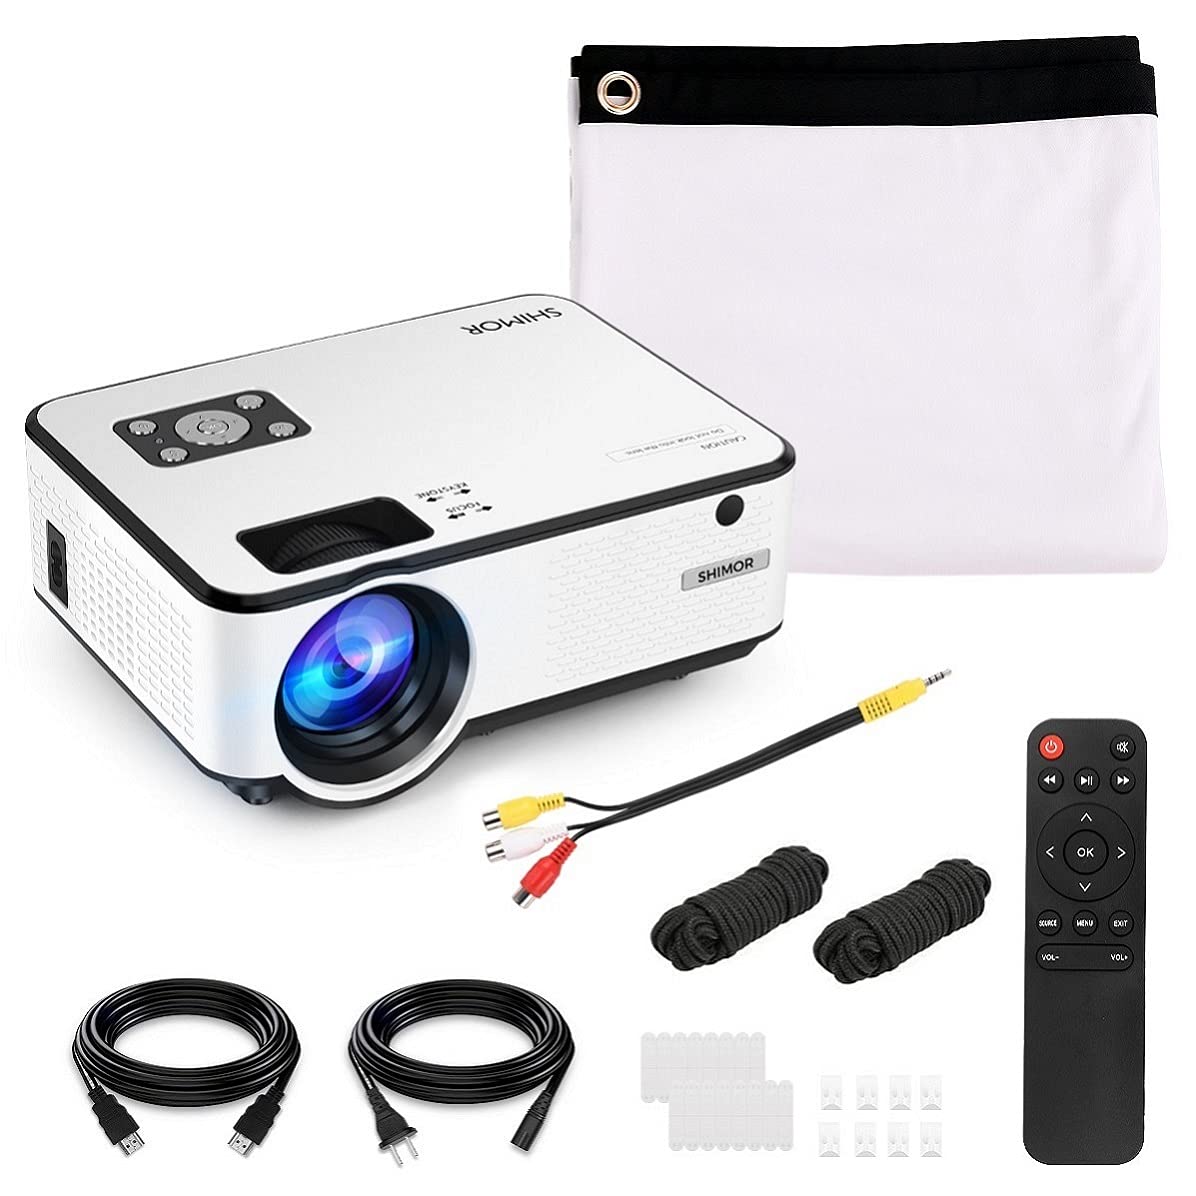 Mini Projector, SHIMOR C9 7500L HD Outdoor Movie Projector with 100 Inch Projector Screen, 1080P Supported Compatible with TV Stick, Video Games, HDMI, USB, AUX, AV, PS4, Laptop, Smartphone